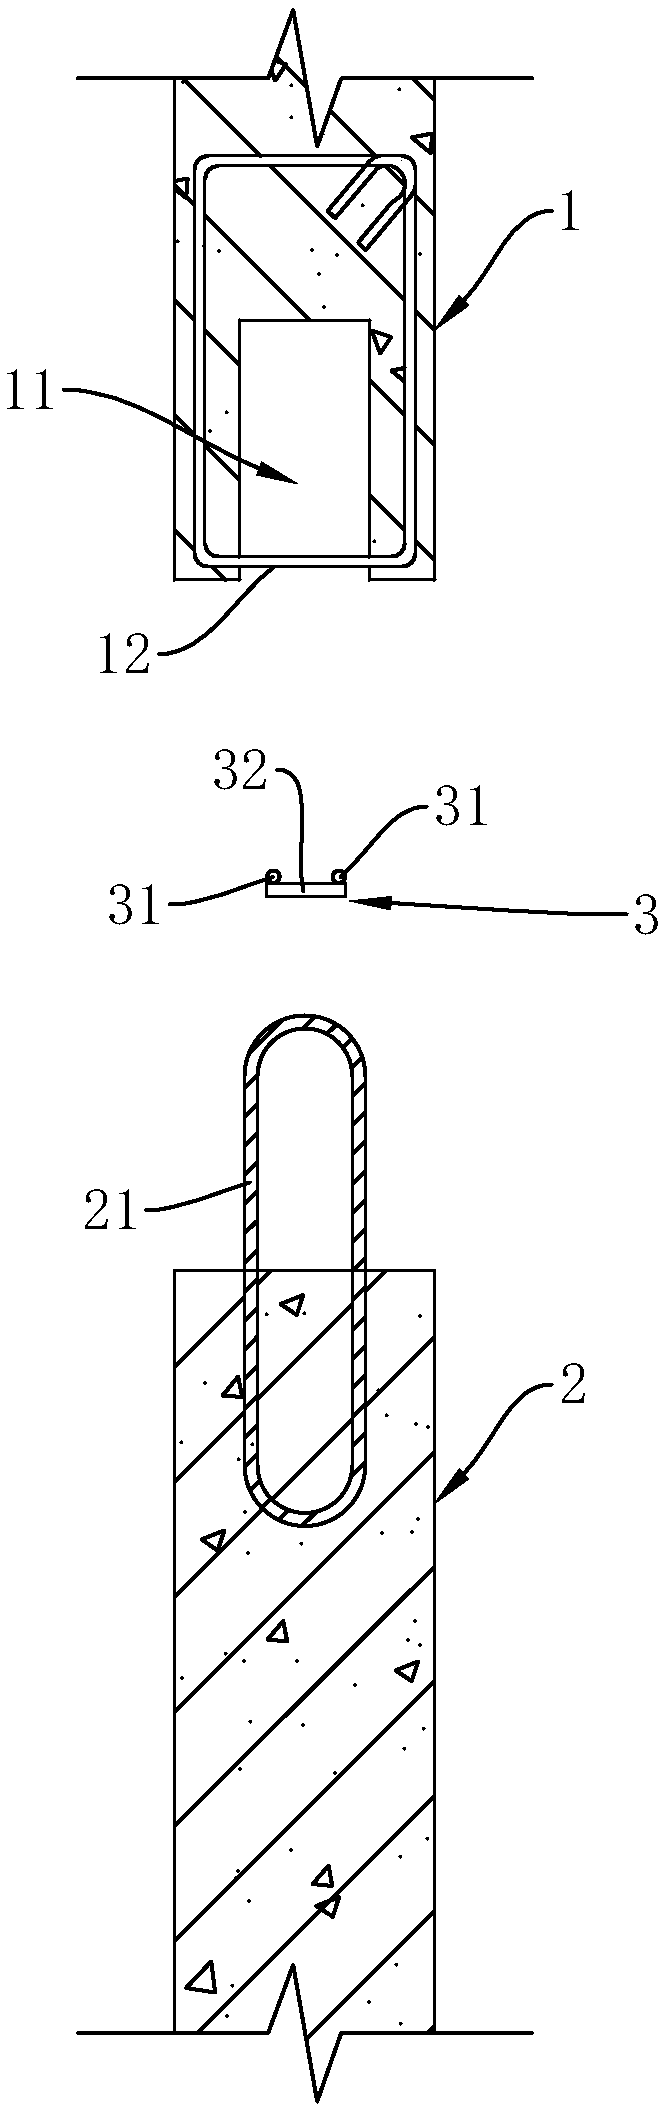 Post-casting system for fabricated shear wall without template